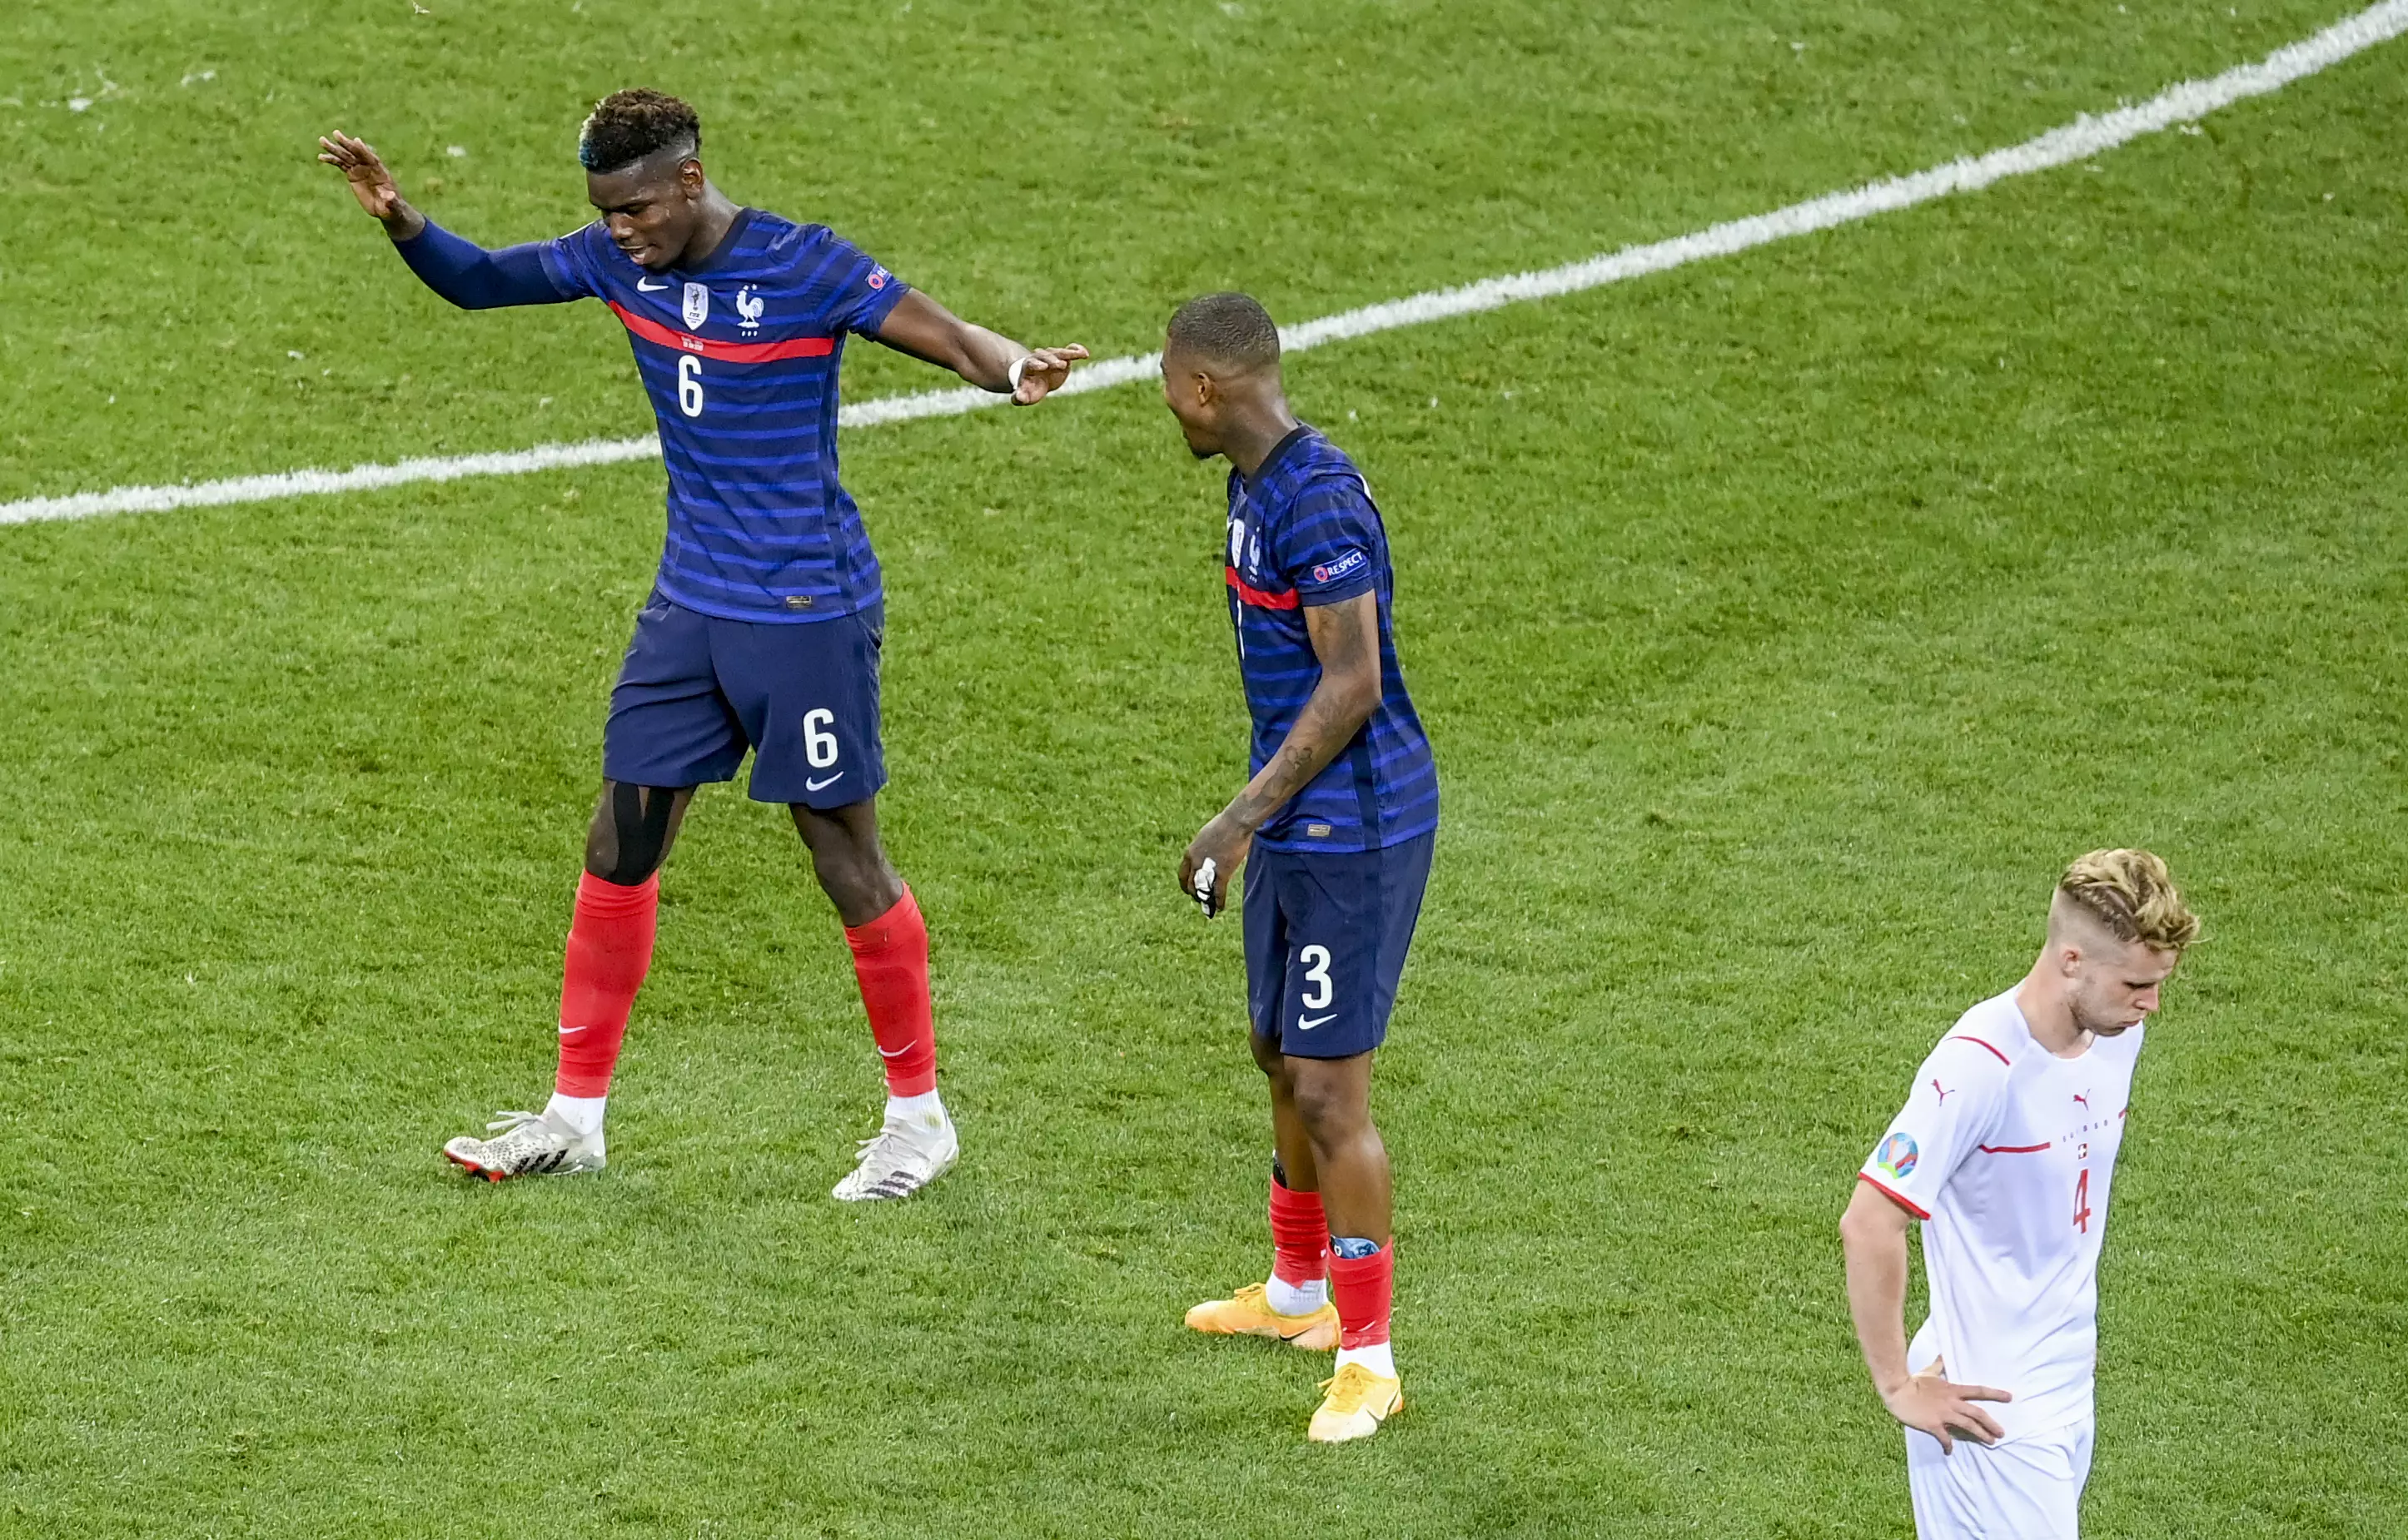 Pogba had an excellent Euros before France were knocked out. Image: PA Images